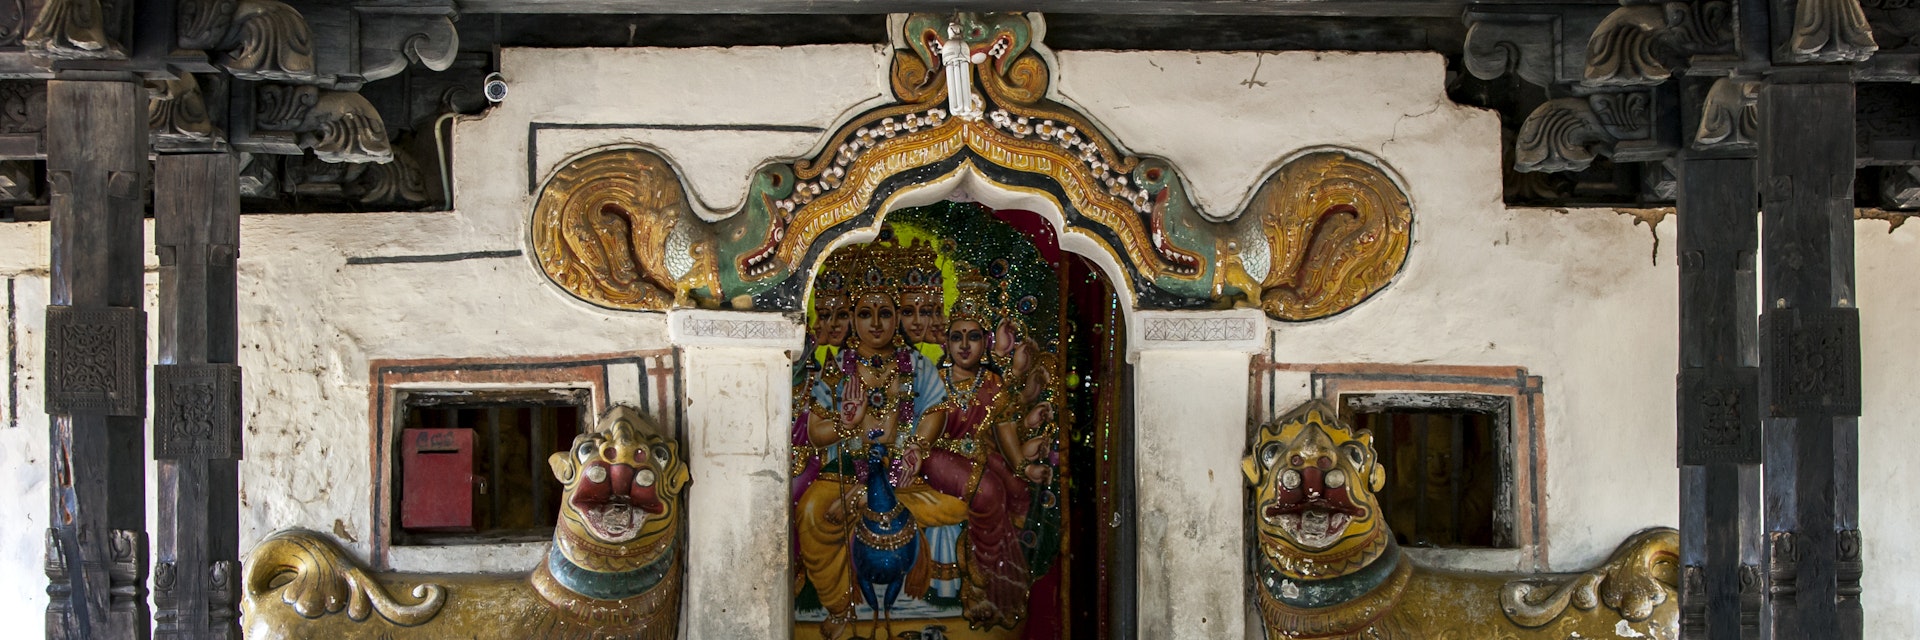 The entrance to the main shrine at Embekka Devale is located at the end of the digge (drummers pavilion) through a door guarded by lion statues.